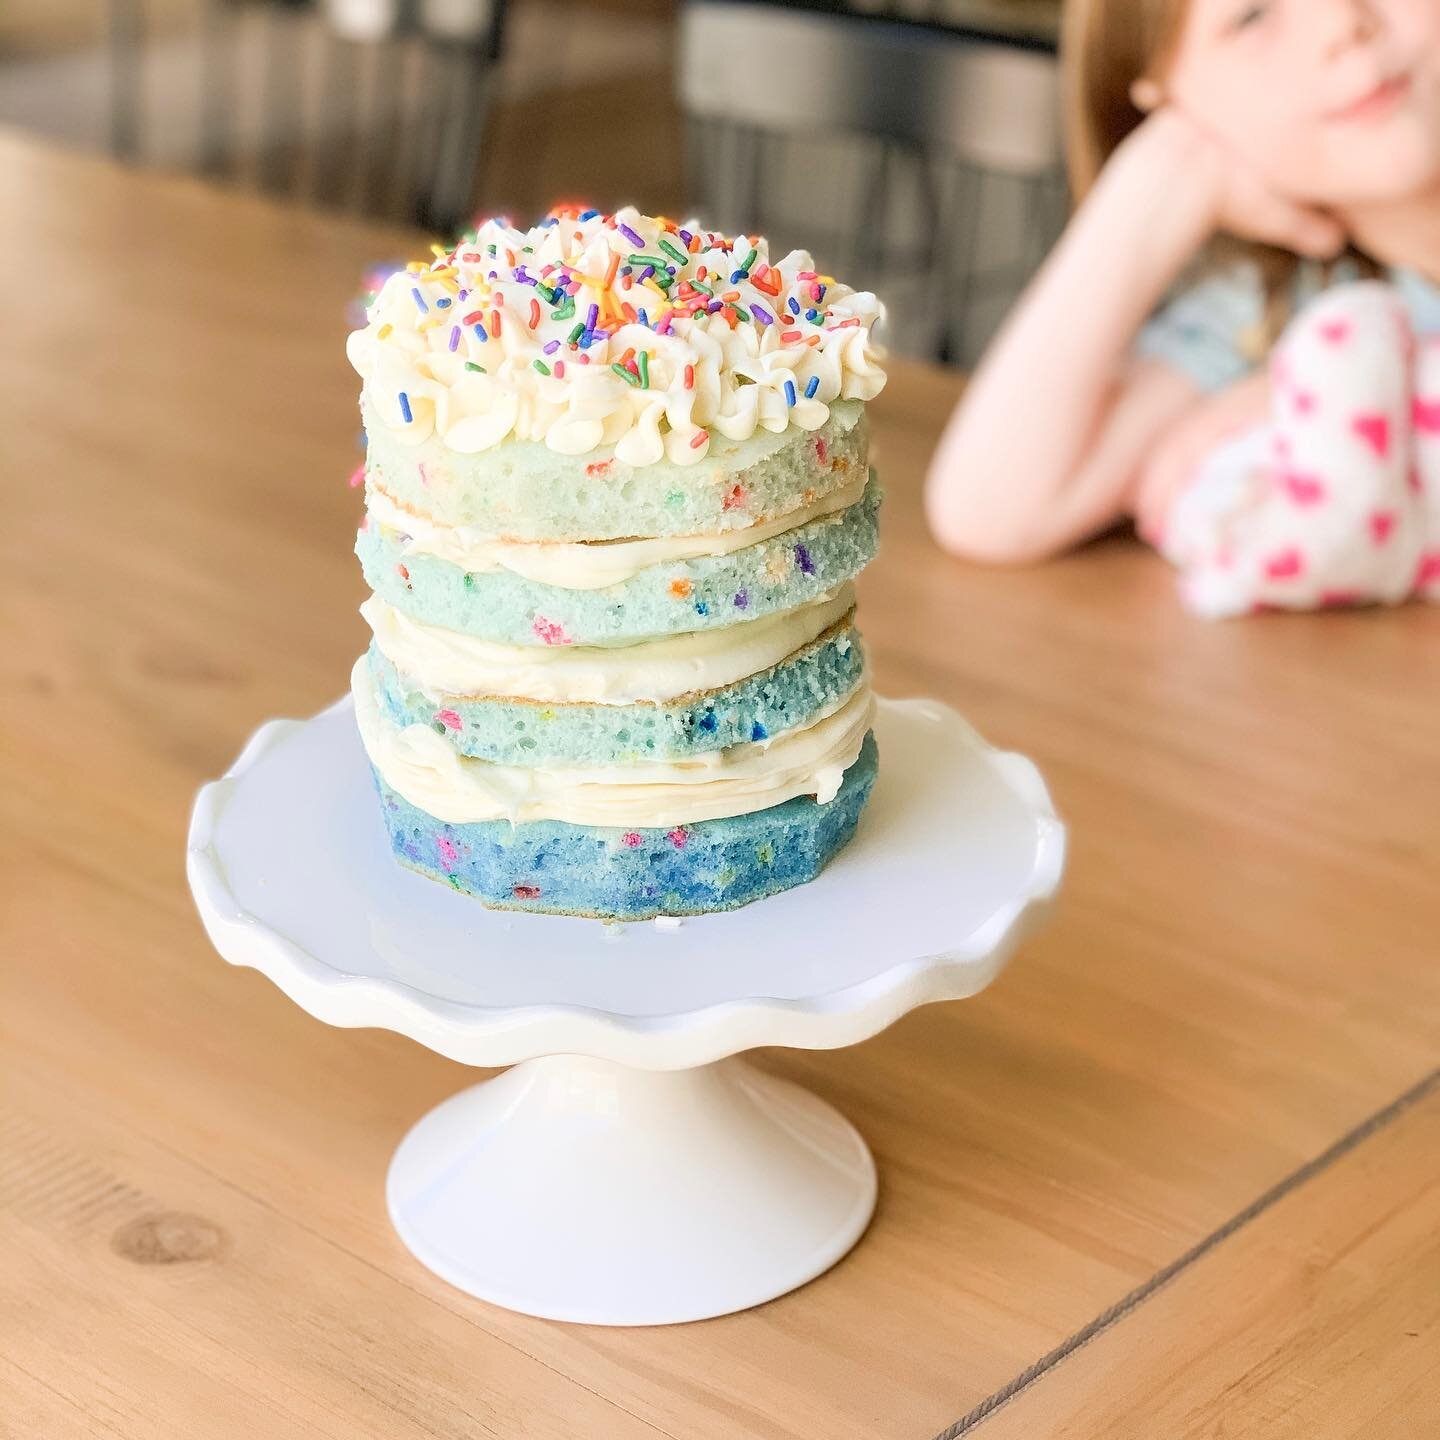 Reece wanted to make a cake, so we MADE.A.CAKE. And it was actually super tasty too! 

Thanks for inspiring your biggest little fan across the pond @cupcakejemma